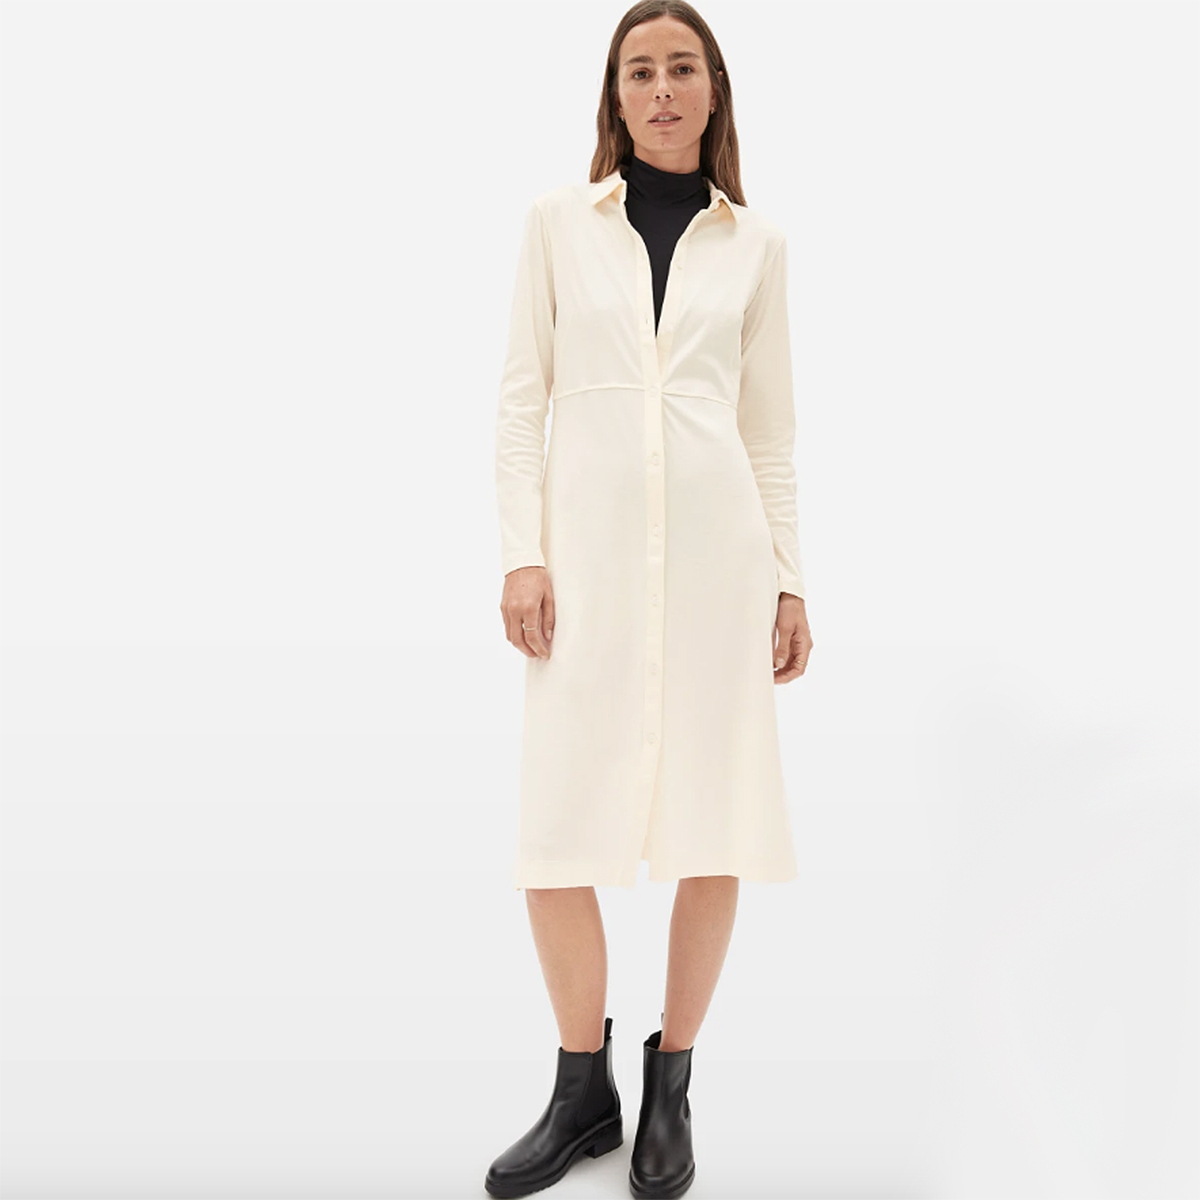 Everlane Has So Many Bestsellers on Sale Right Now | UsWeekly